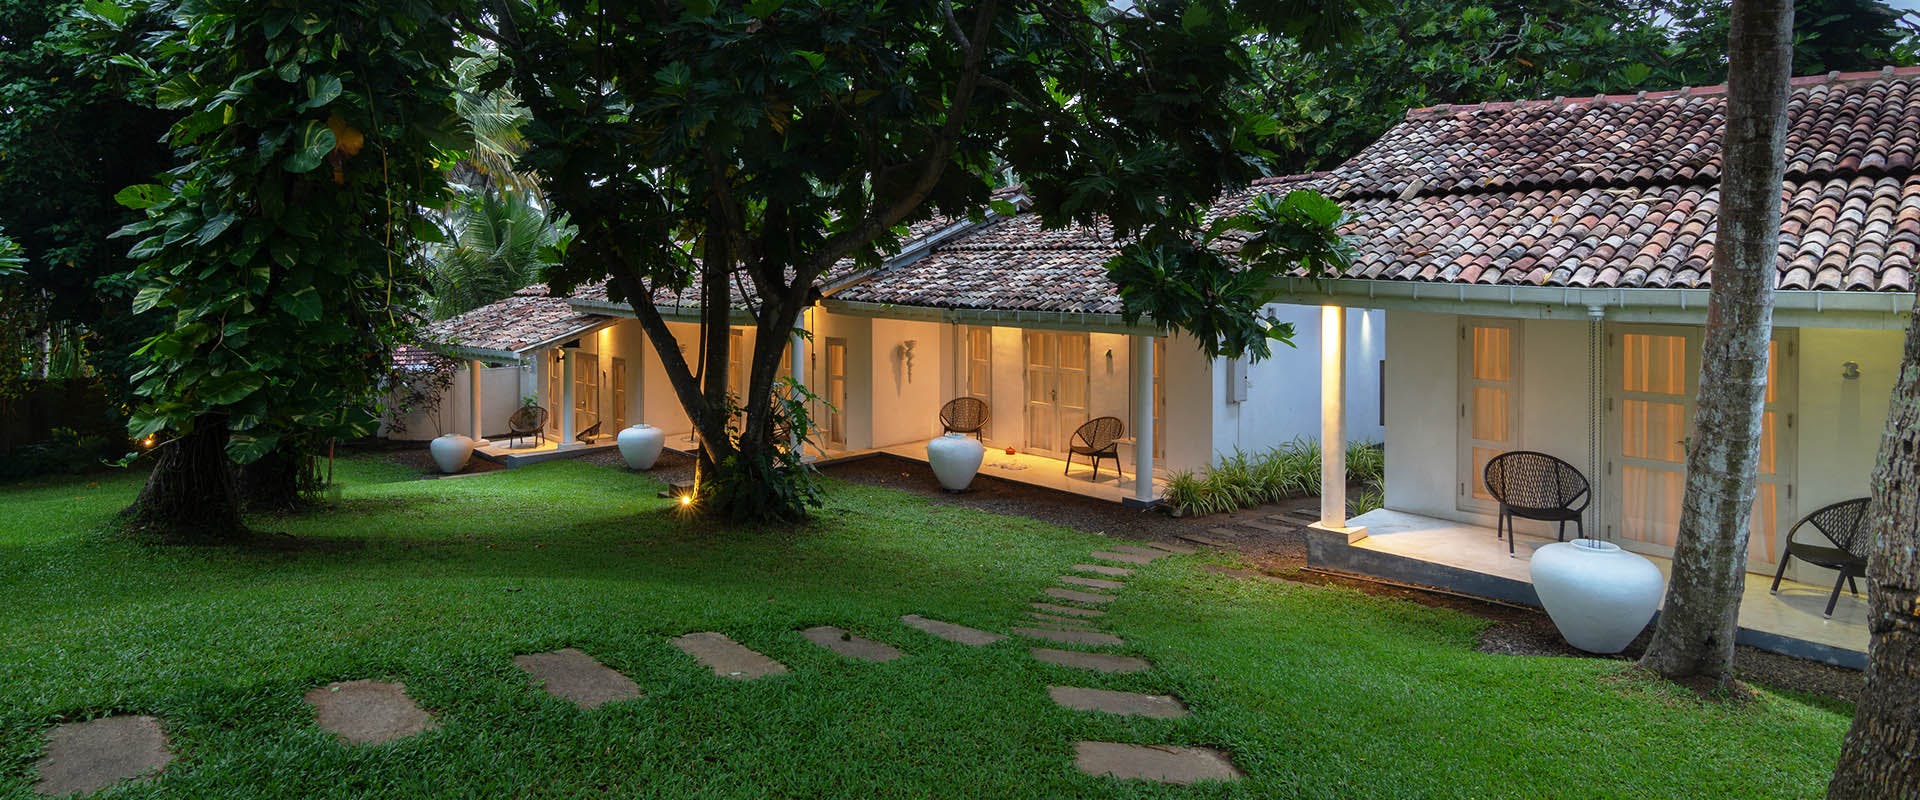 Villa Suite and dining at W15 Ahangama Weligama Galle Sri Lanka